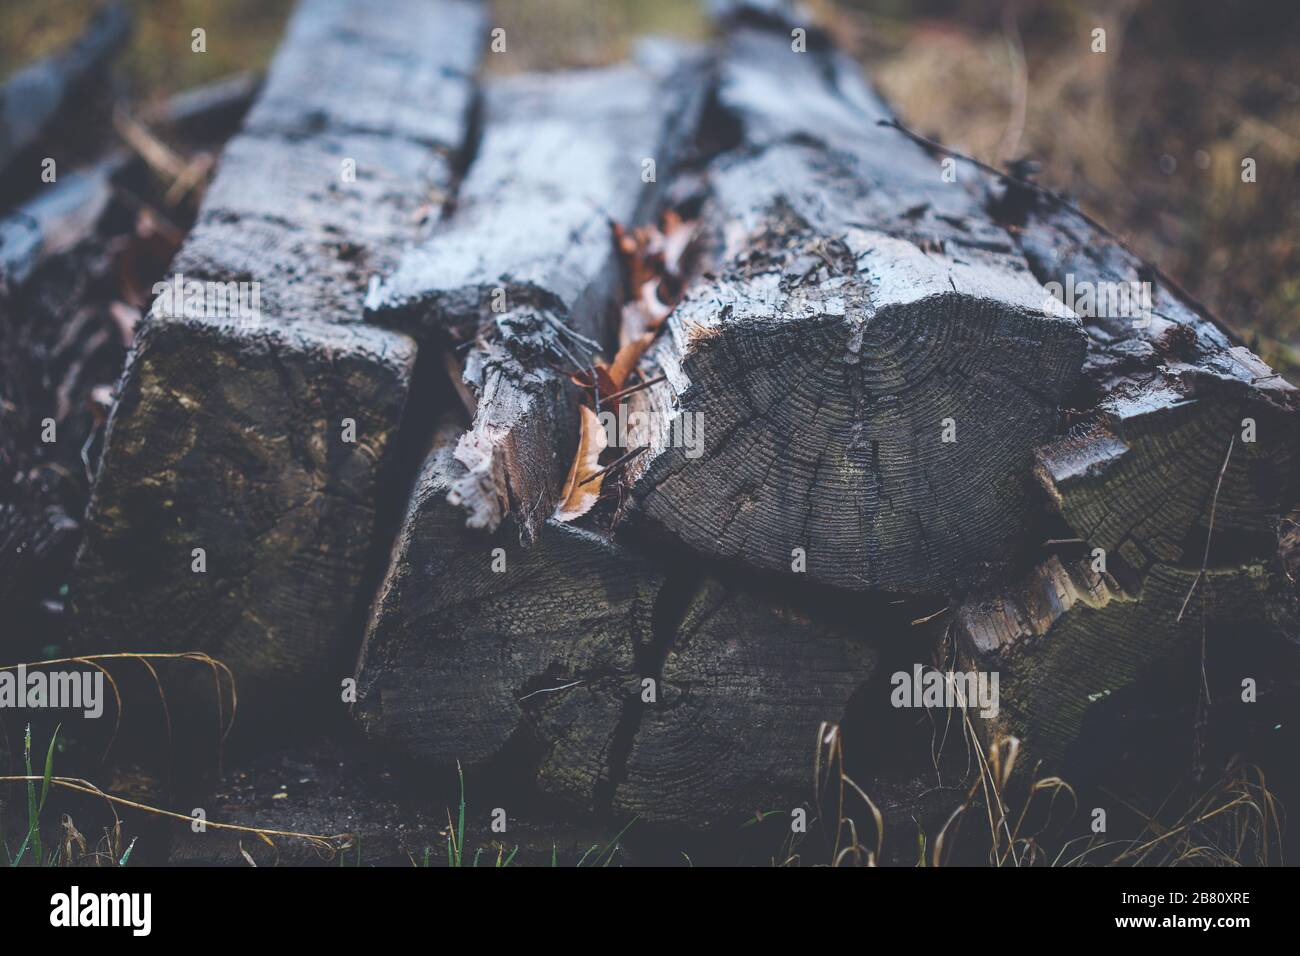 Old wooden decayed and ramshackle railway sleepers stacked up on side of railway line Stock Photo